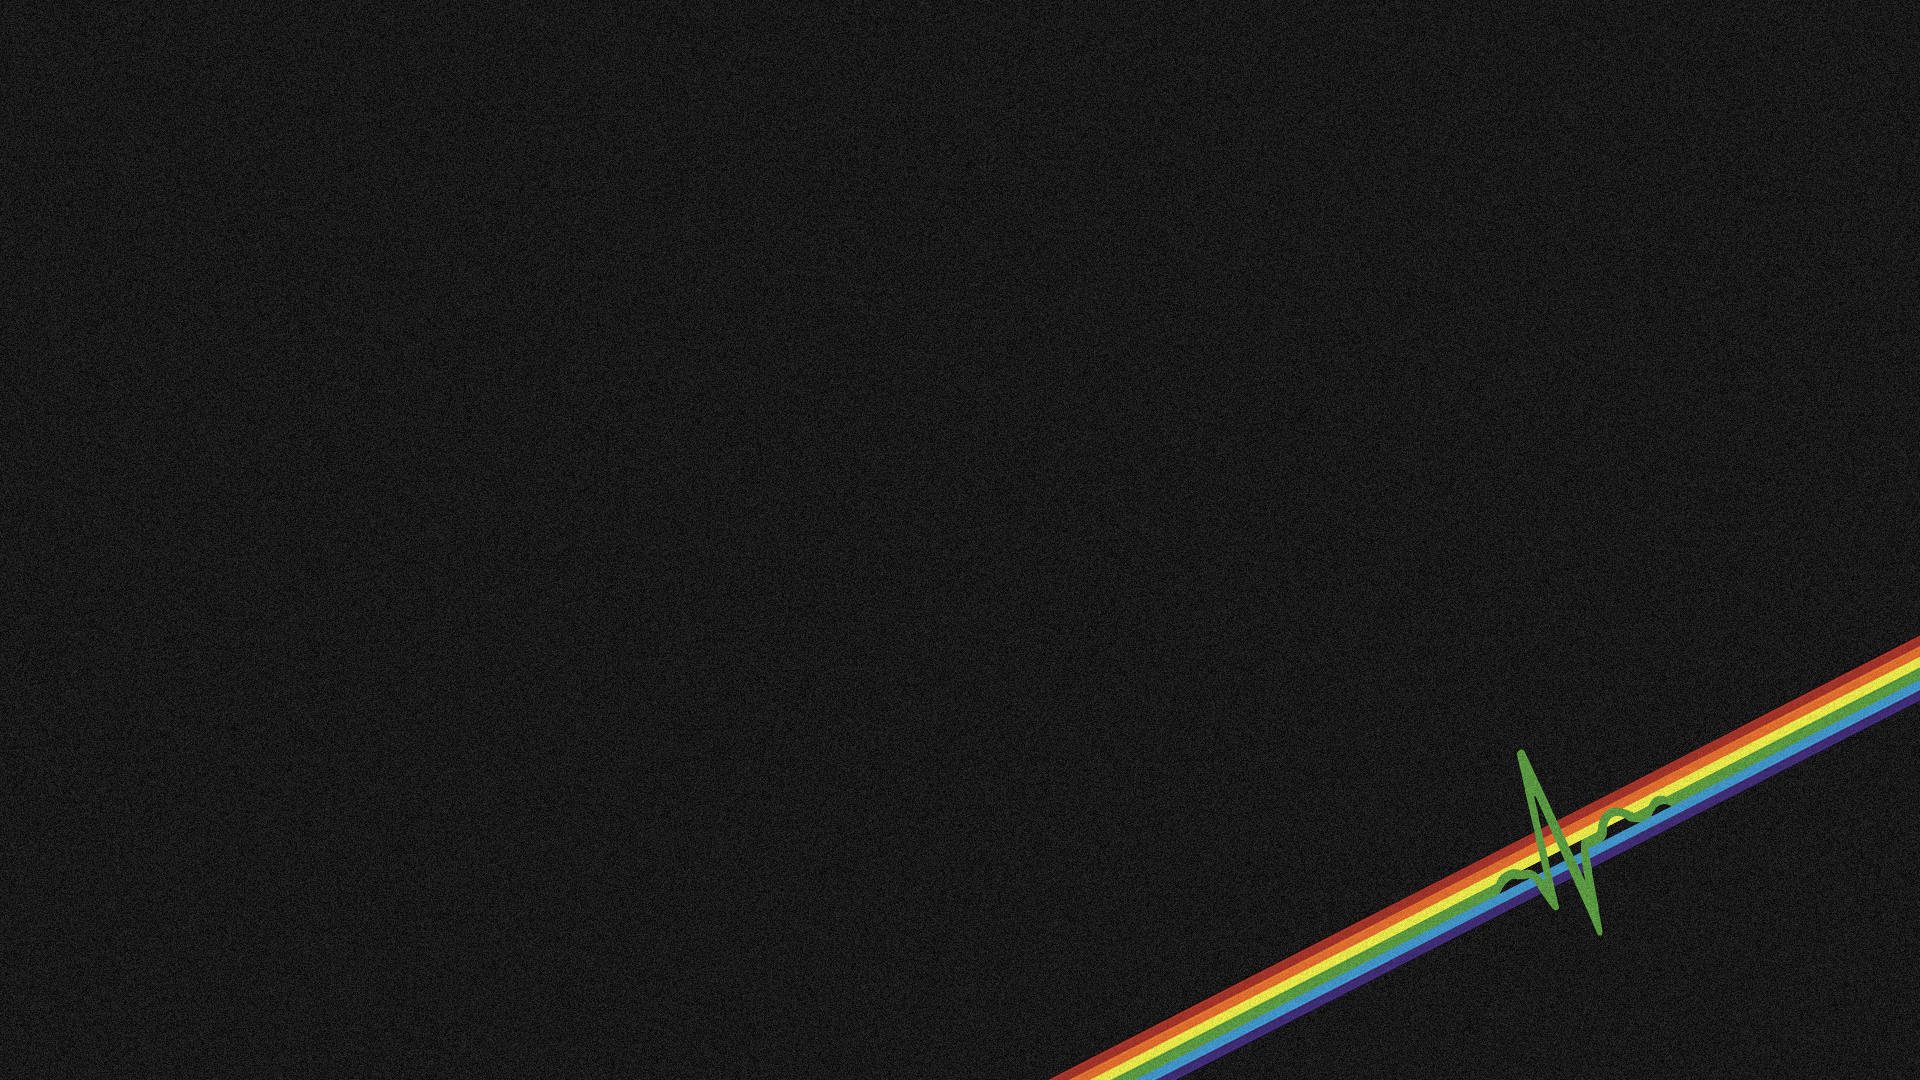 I made this minimalist Dark Side of the Moon wallpaper. Thought